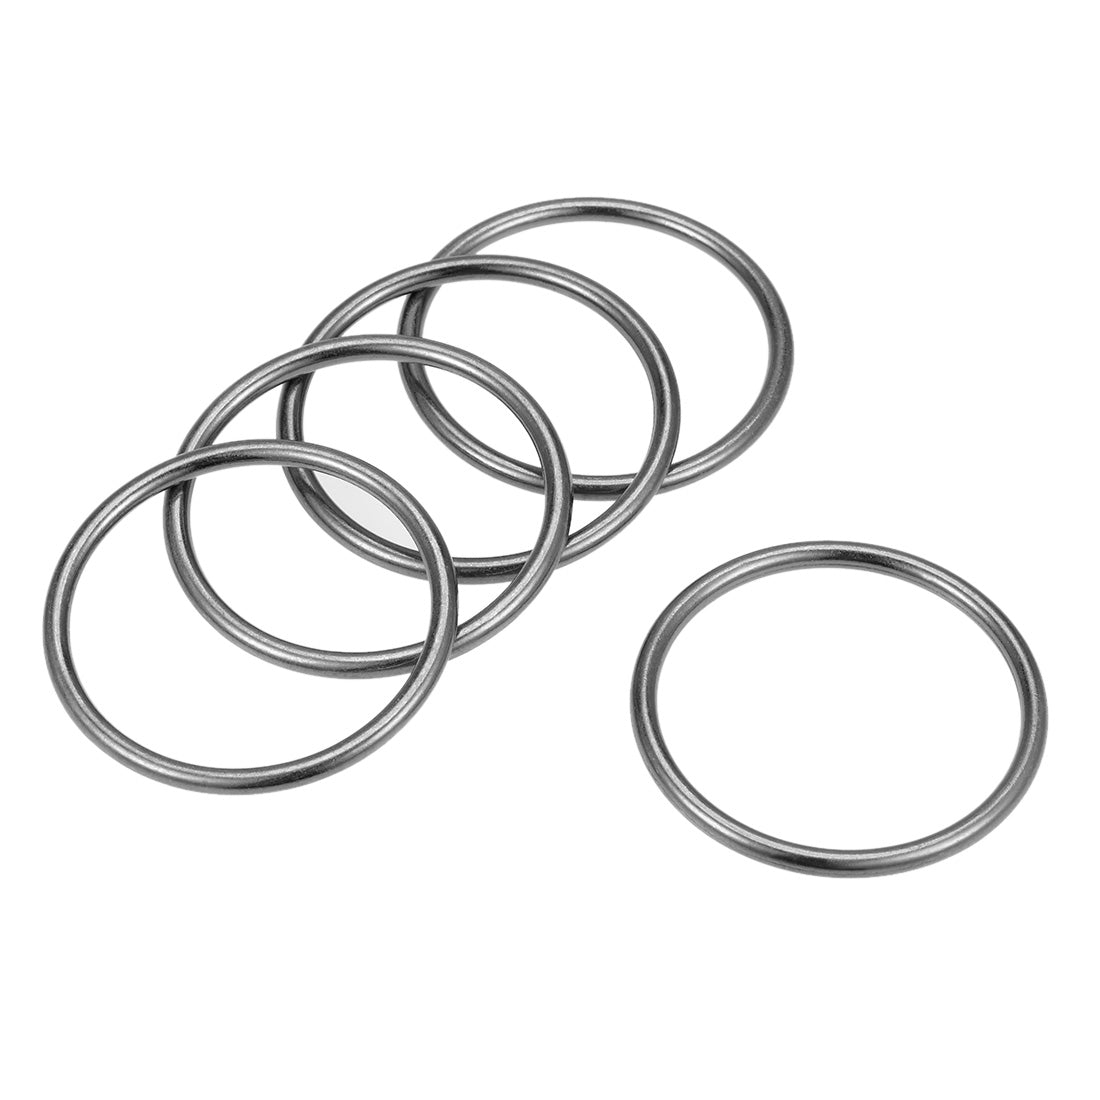 uxcell Uxcell O Ring Buckle 40mm(1.6") ID 3mm Thickness Zinc Alloy O-Rings for Hardware Bags Belts Craft DIY Accessories, Black 5pcs